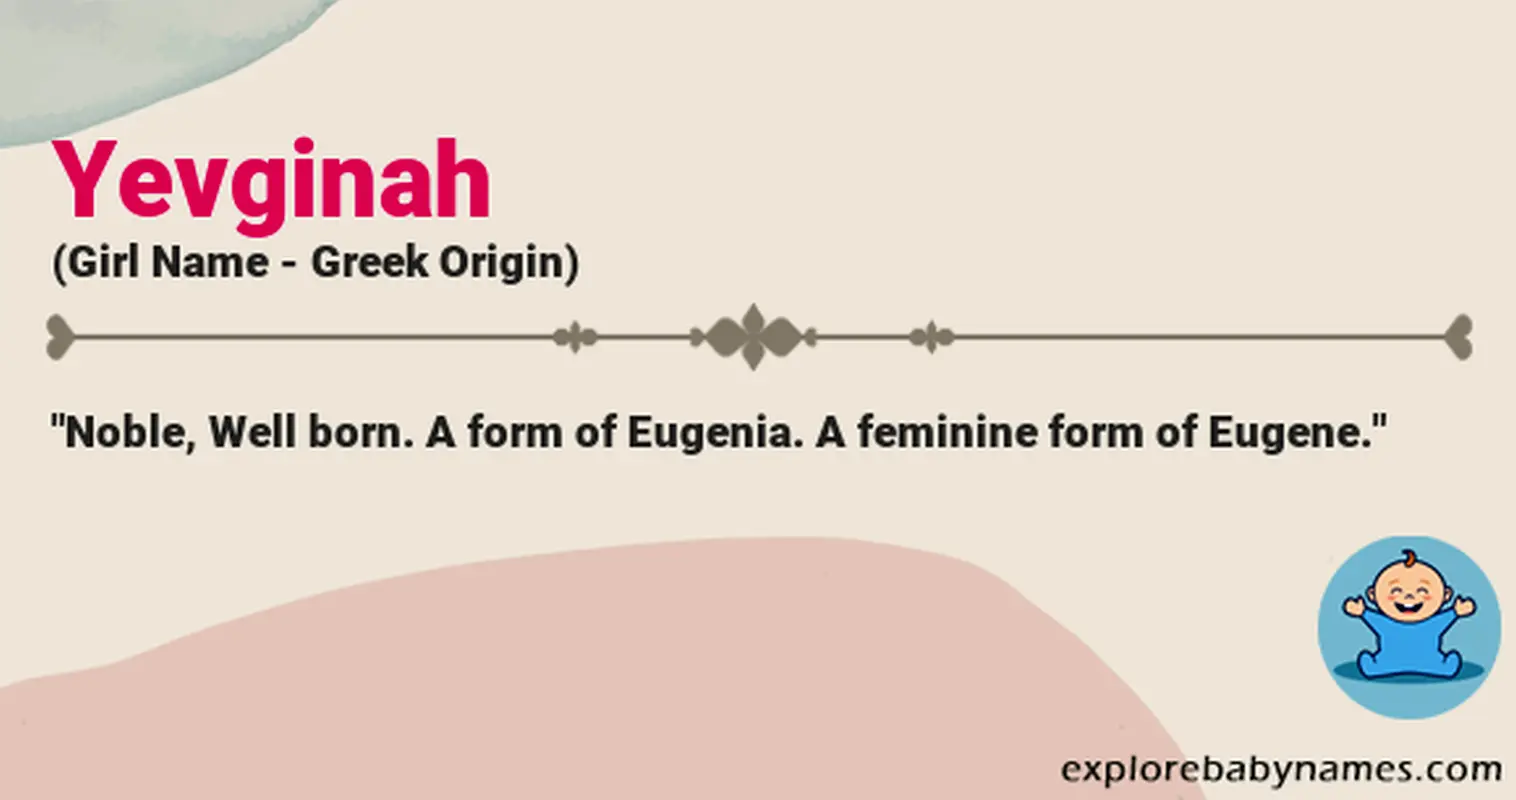 Meaning of Yevginah